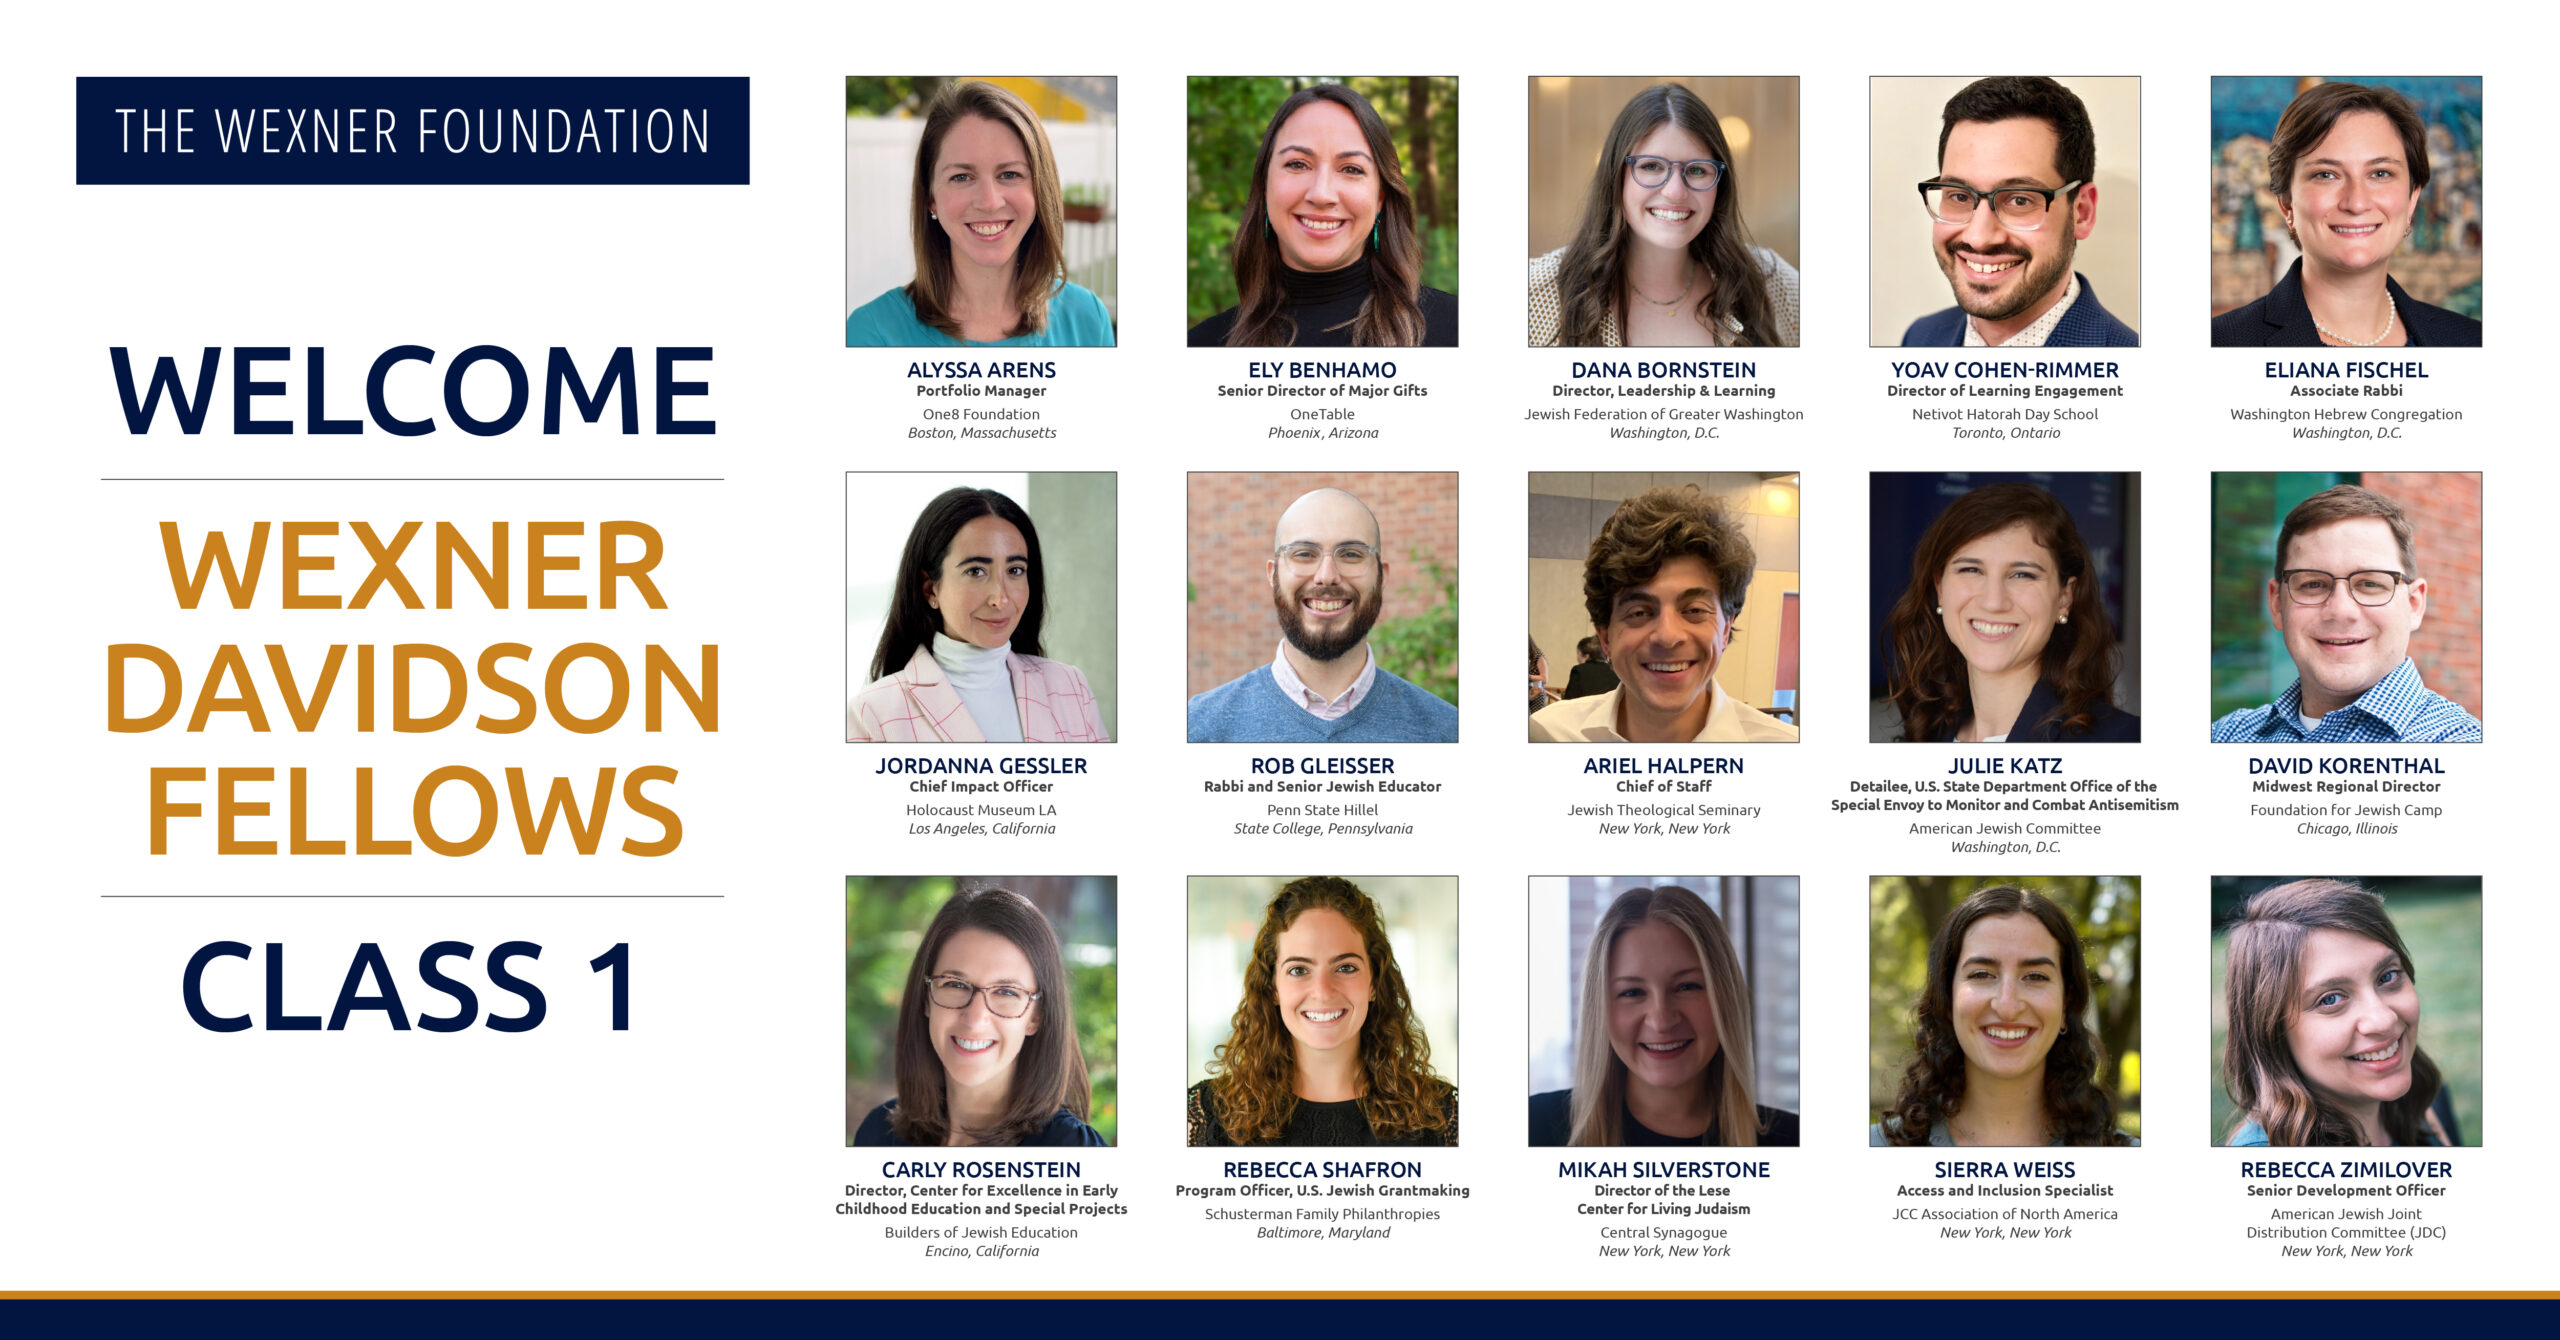 The Wexner Foundation Announces Class 1 of the Wexner Davidson Fellowship